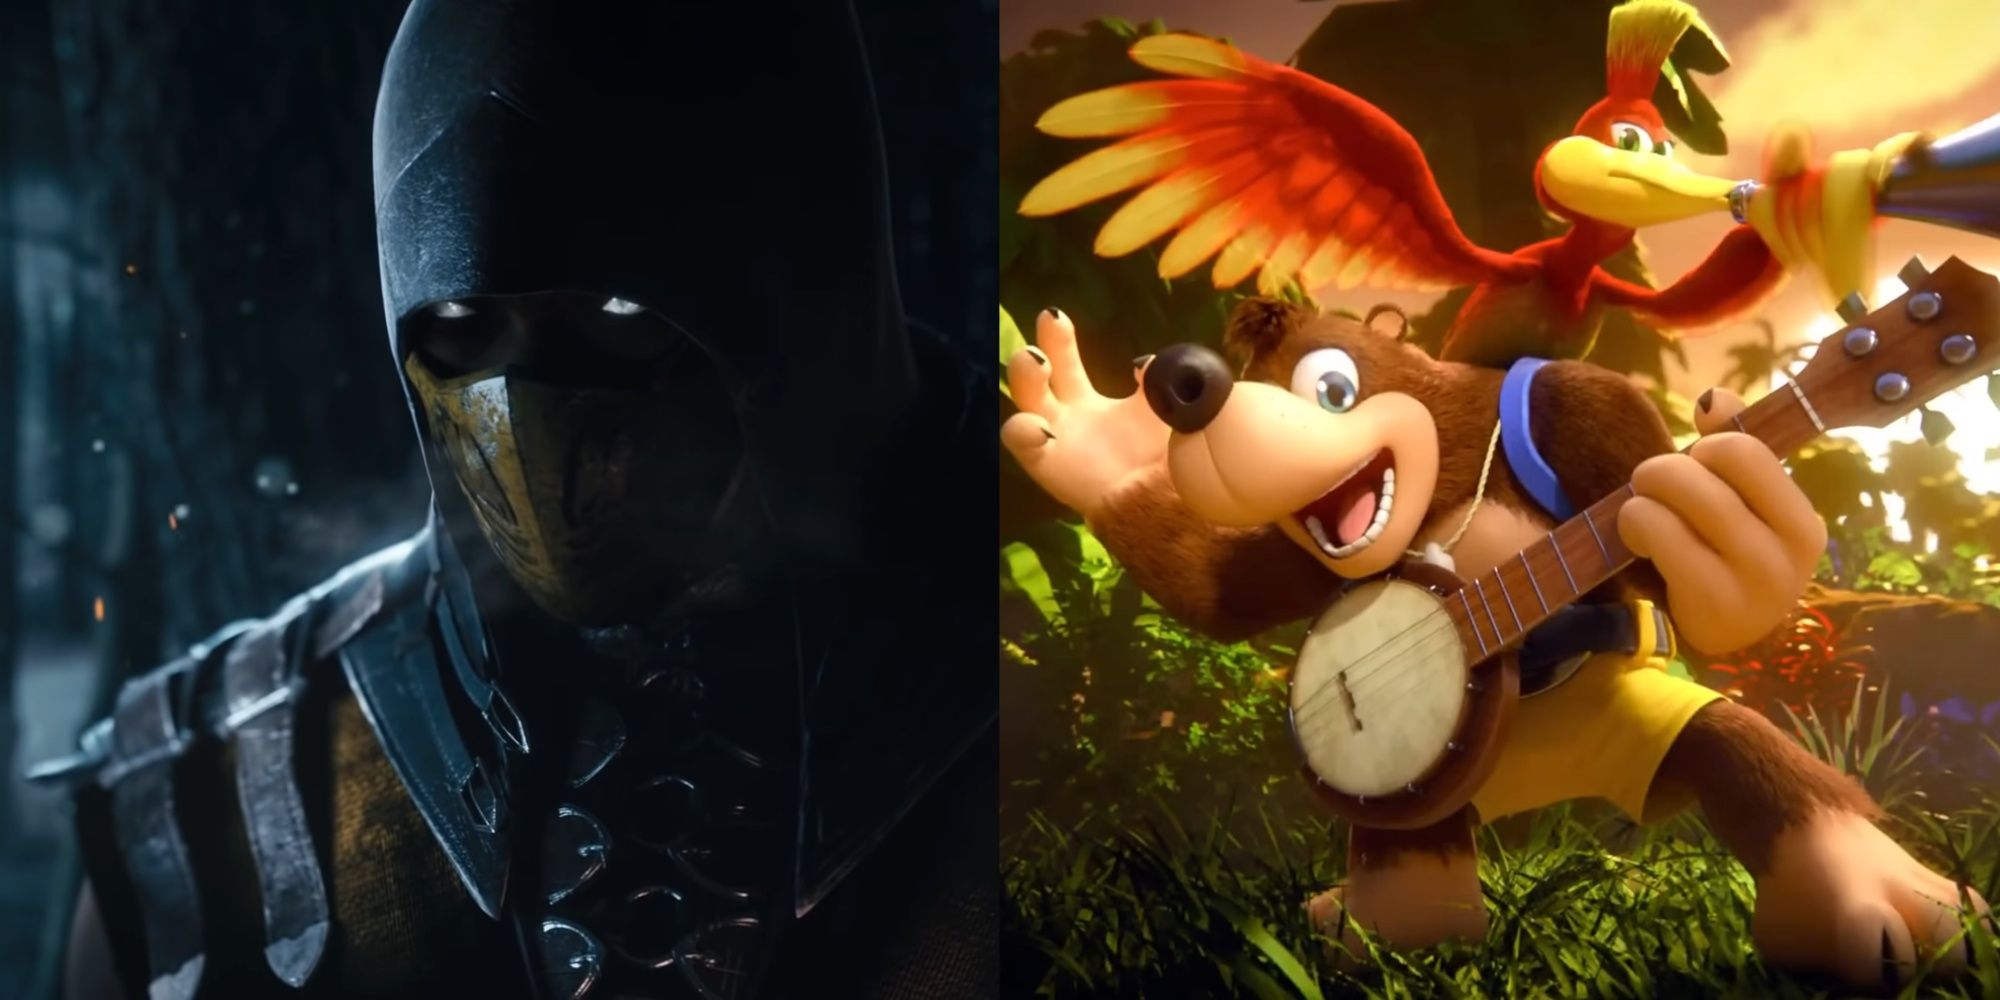 Scorpion from Mortal Kombat X and Banjo-Kazooie from Super Smash Bros. Ultimate.